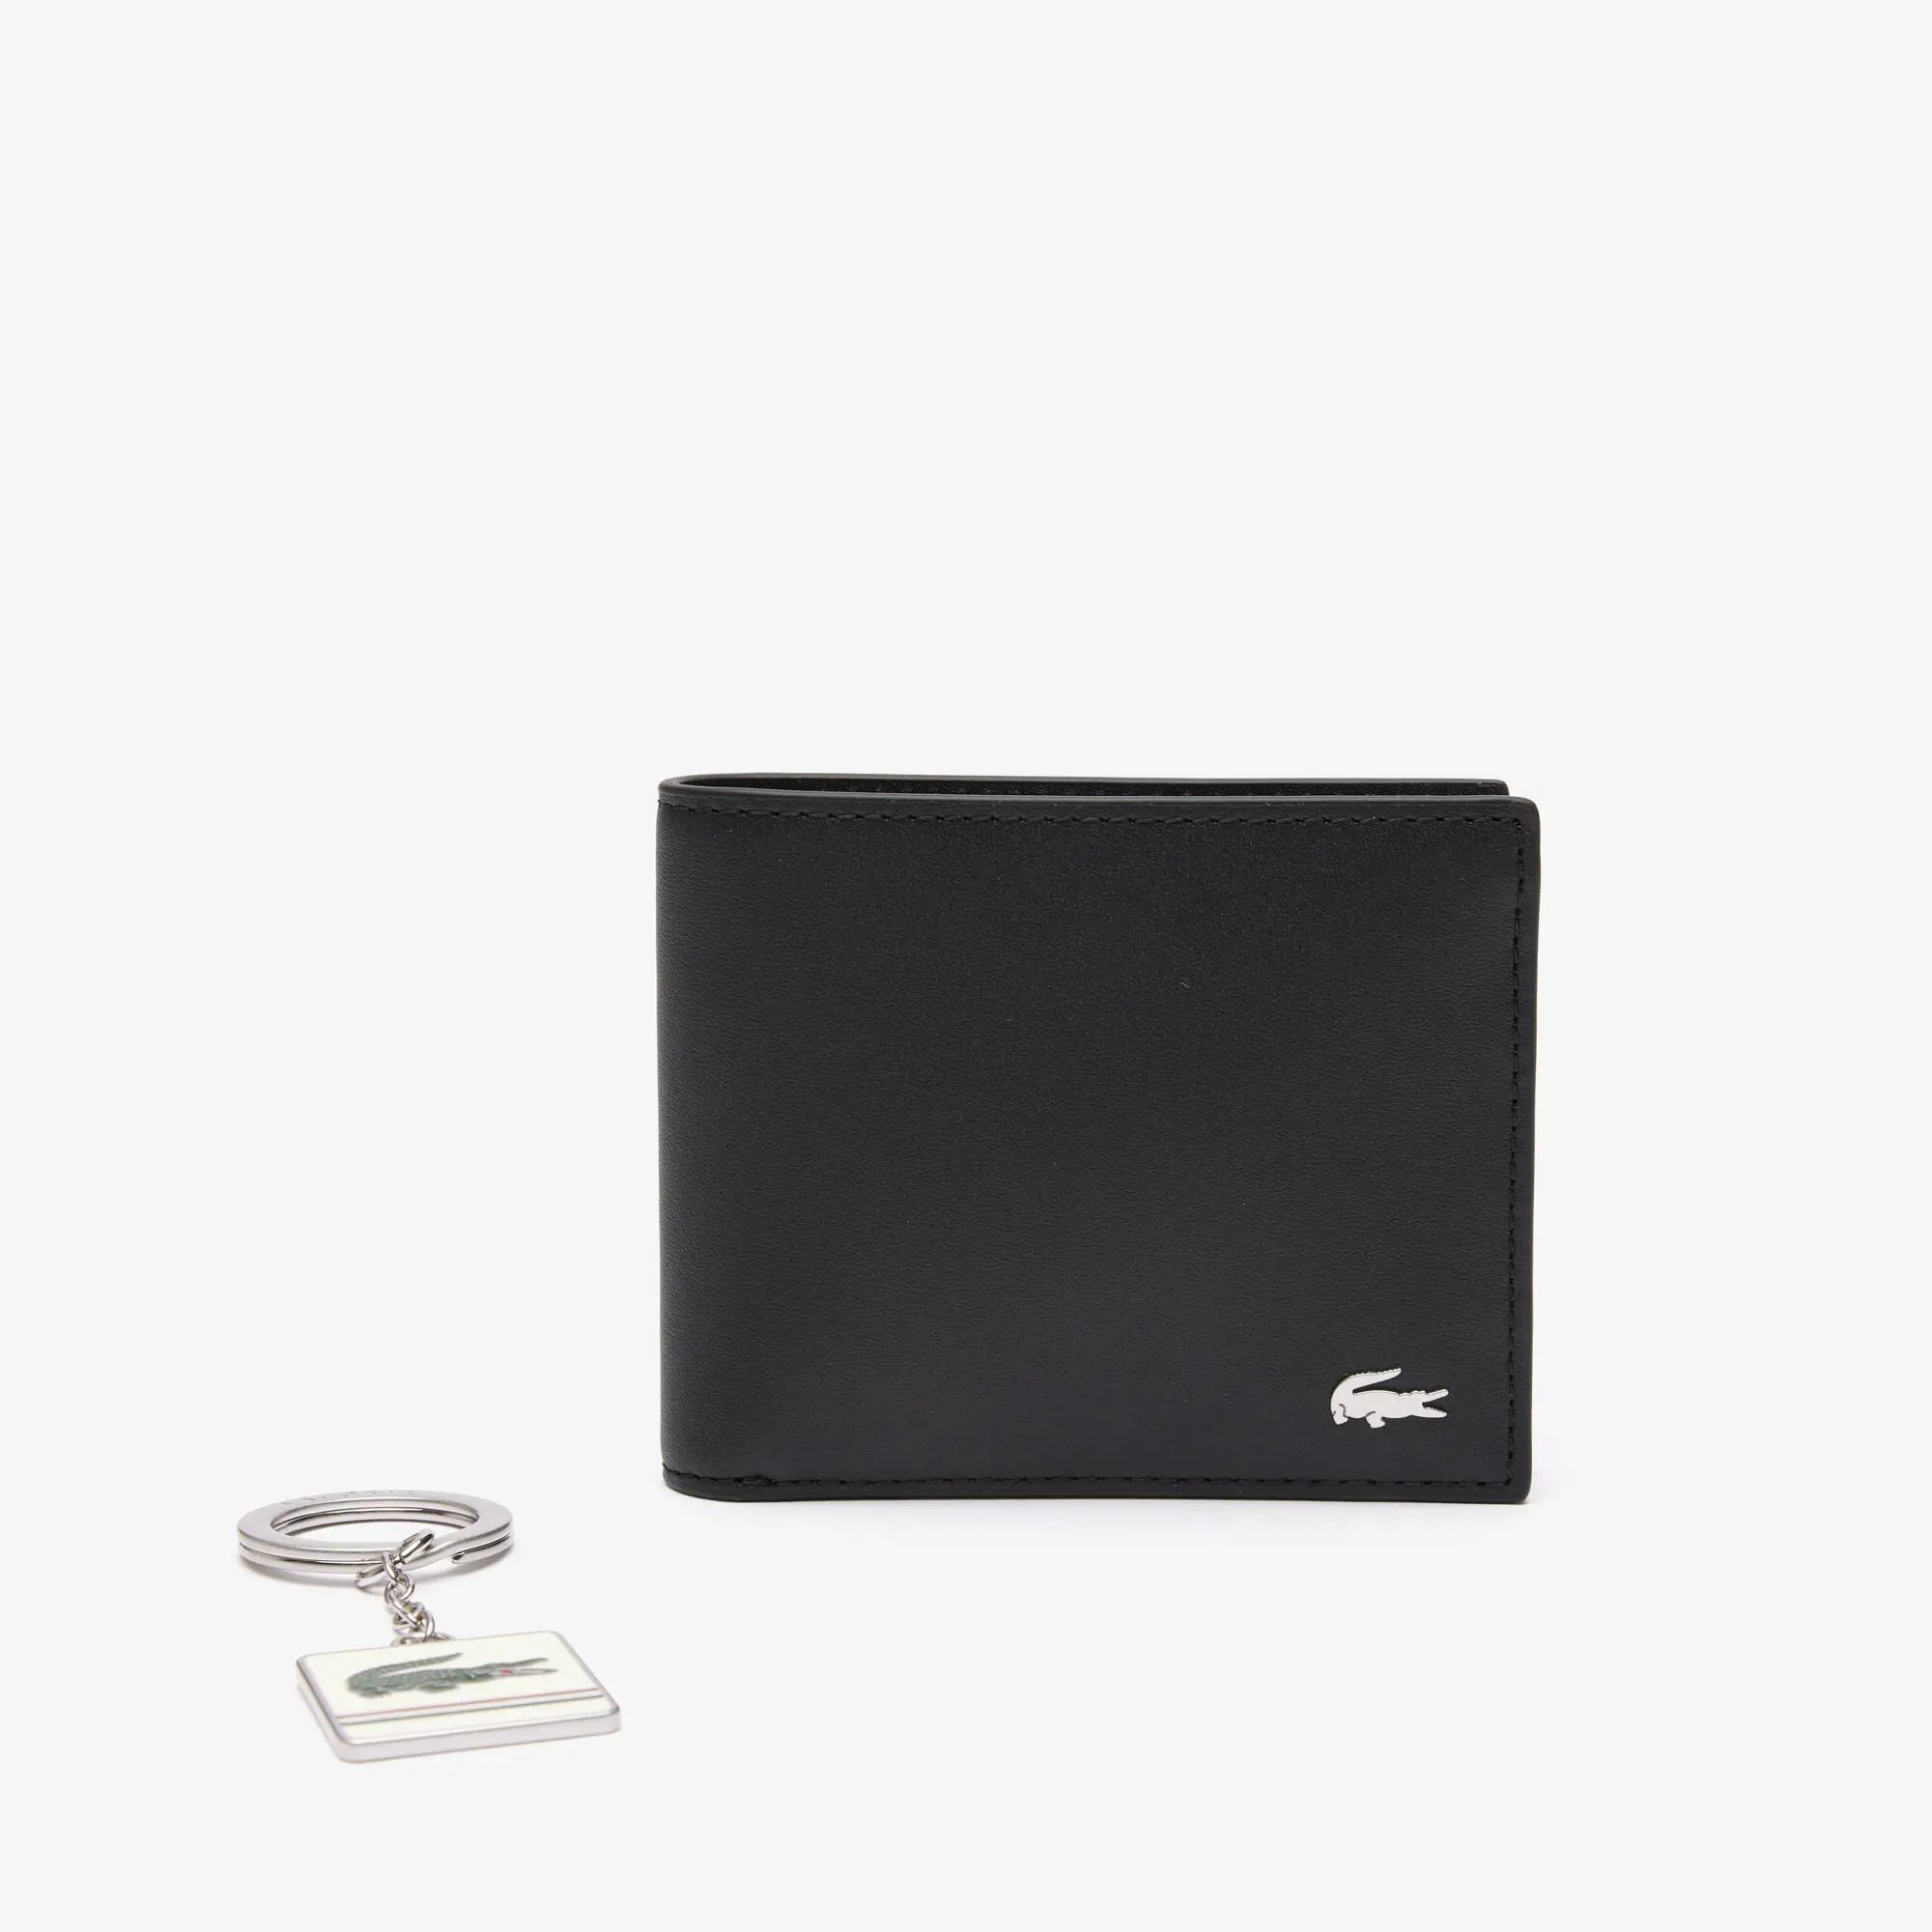 Lacoste Wallet and Key Chain Gift Set. 1